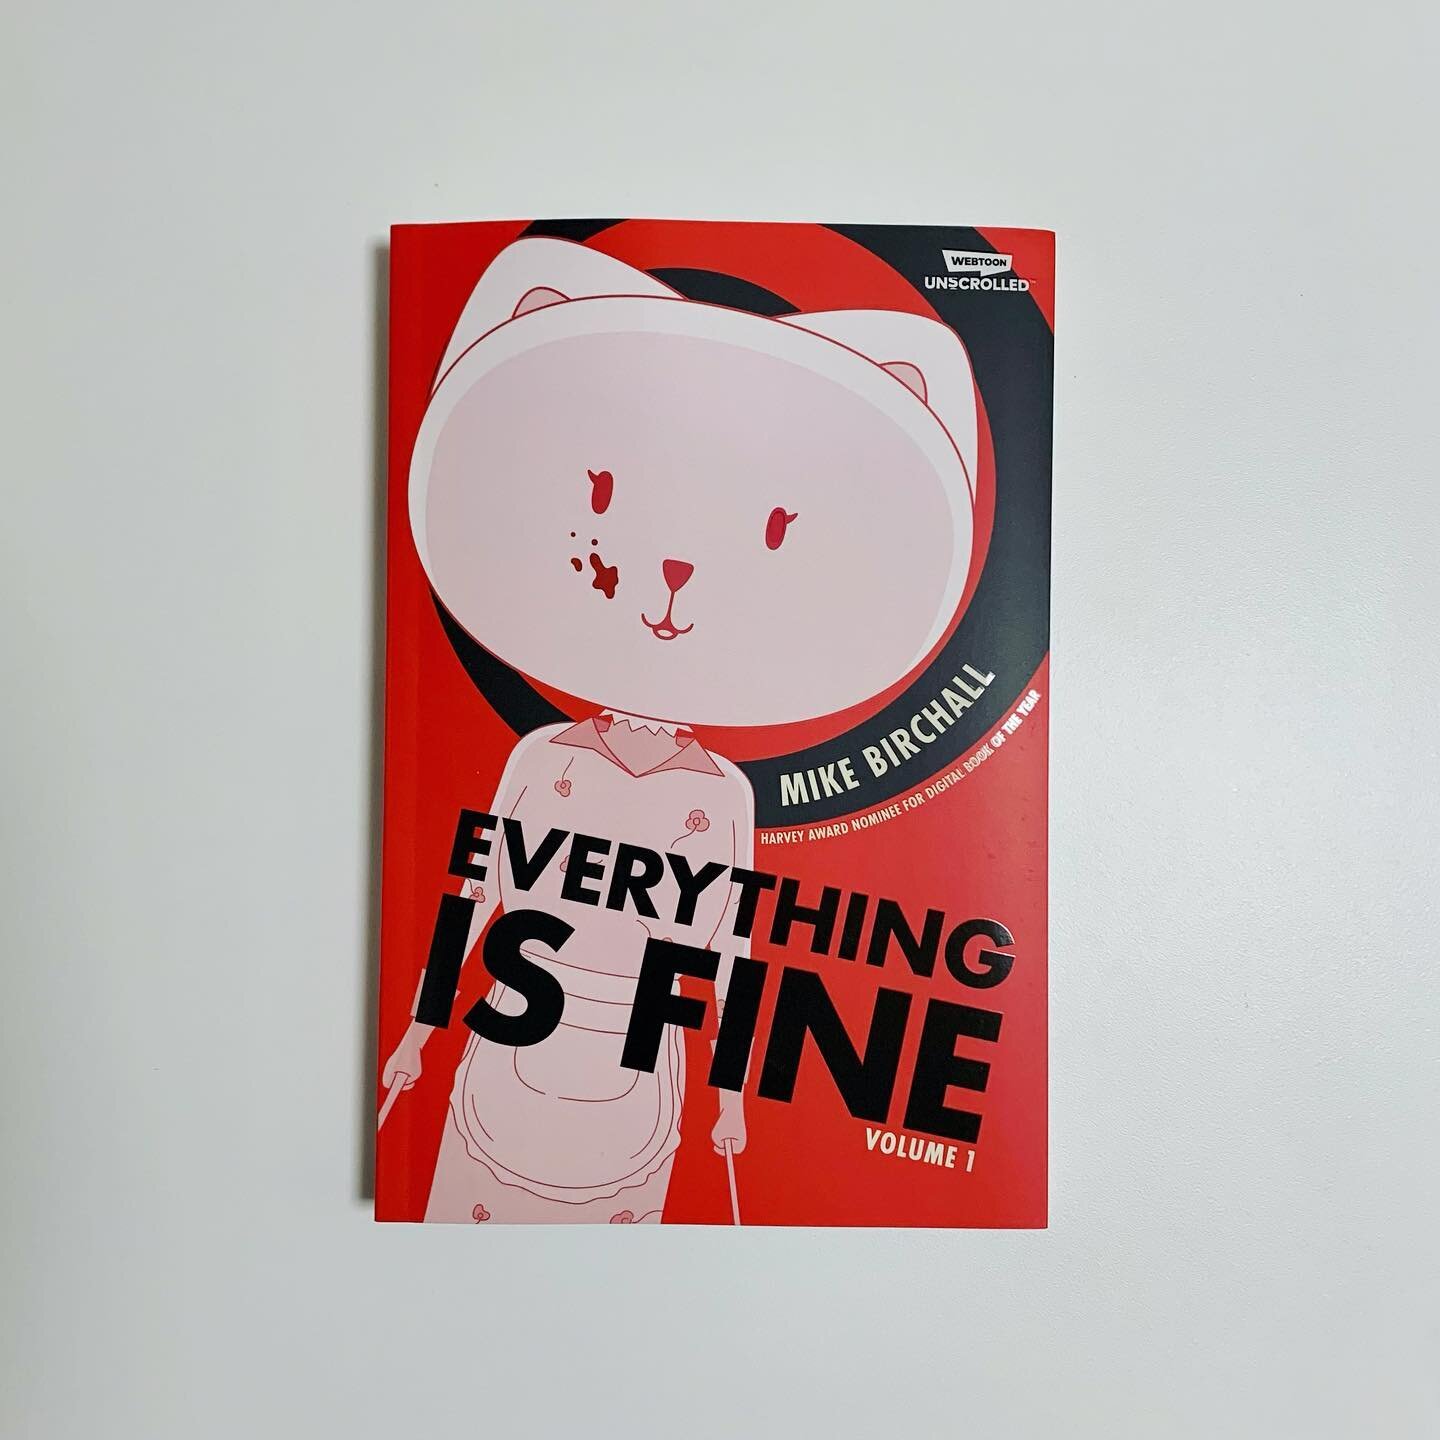 [✨ OUT TODAY: Everything is Fine vol. 1 ✨]

i've been waiting SO LONG to post about this book 😹 i had the time of my life working on the design of this book. thank you to @mikebcomics and @emmadaydreams for trusting me with the design direction. you